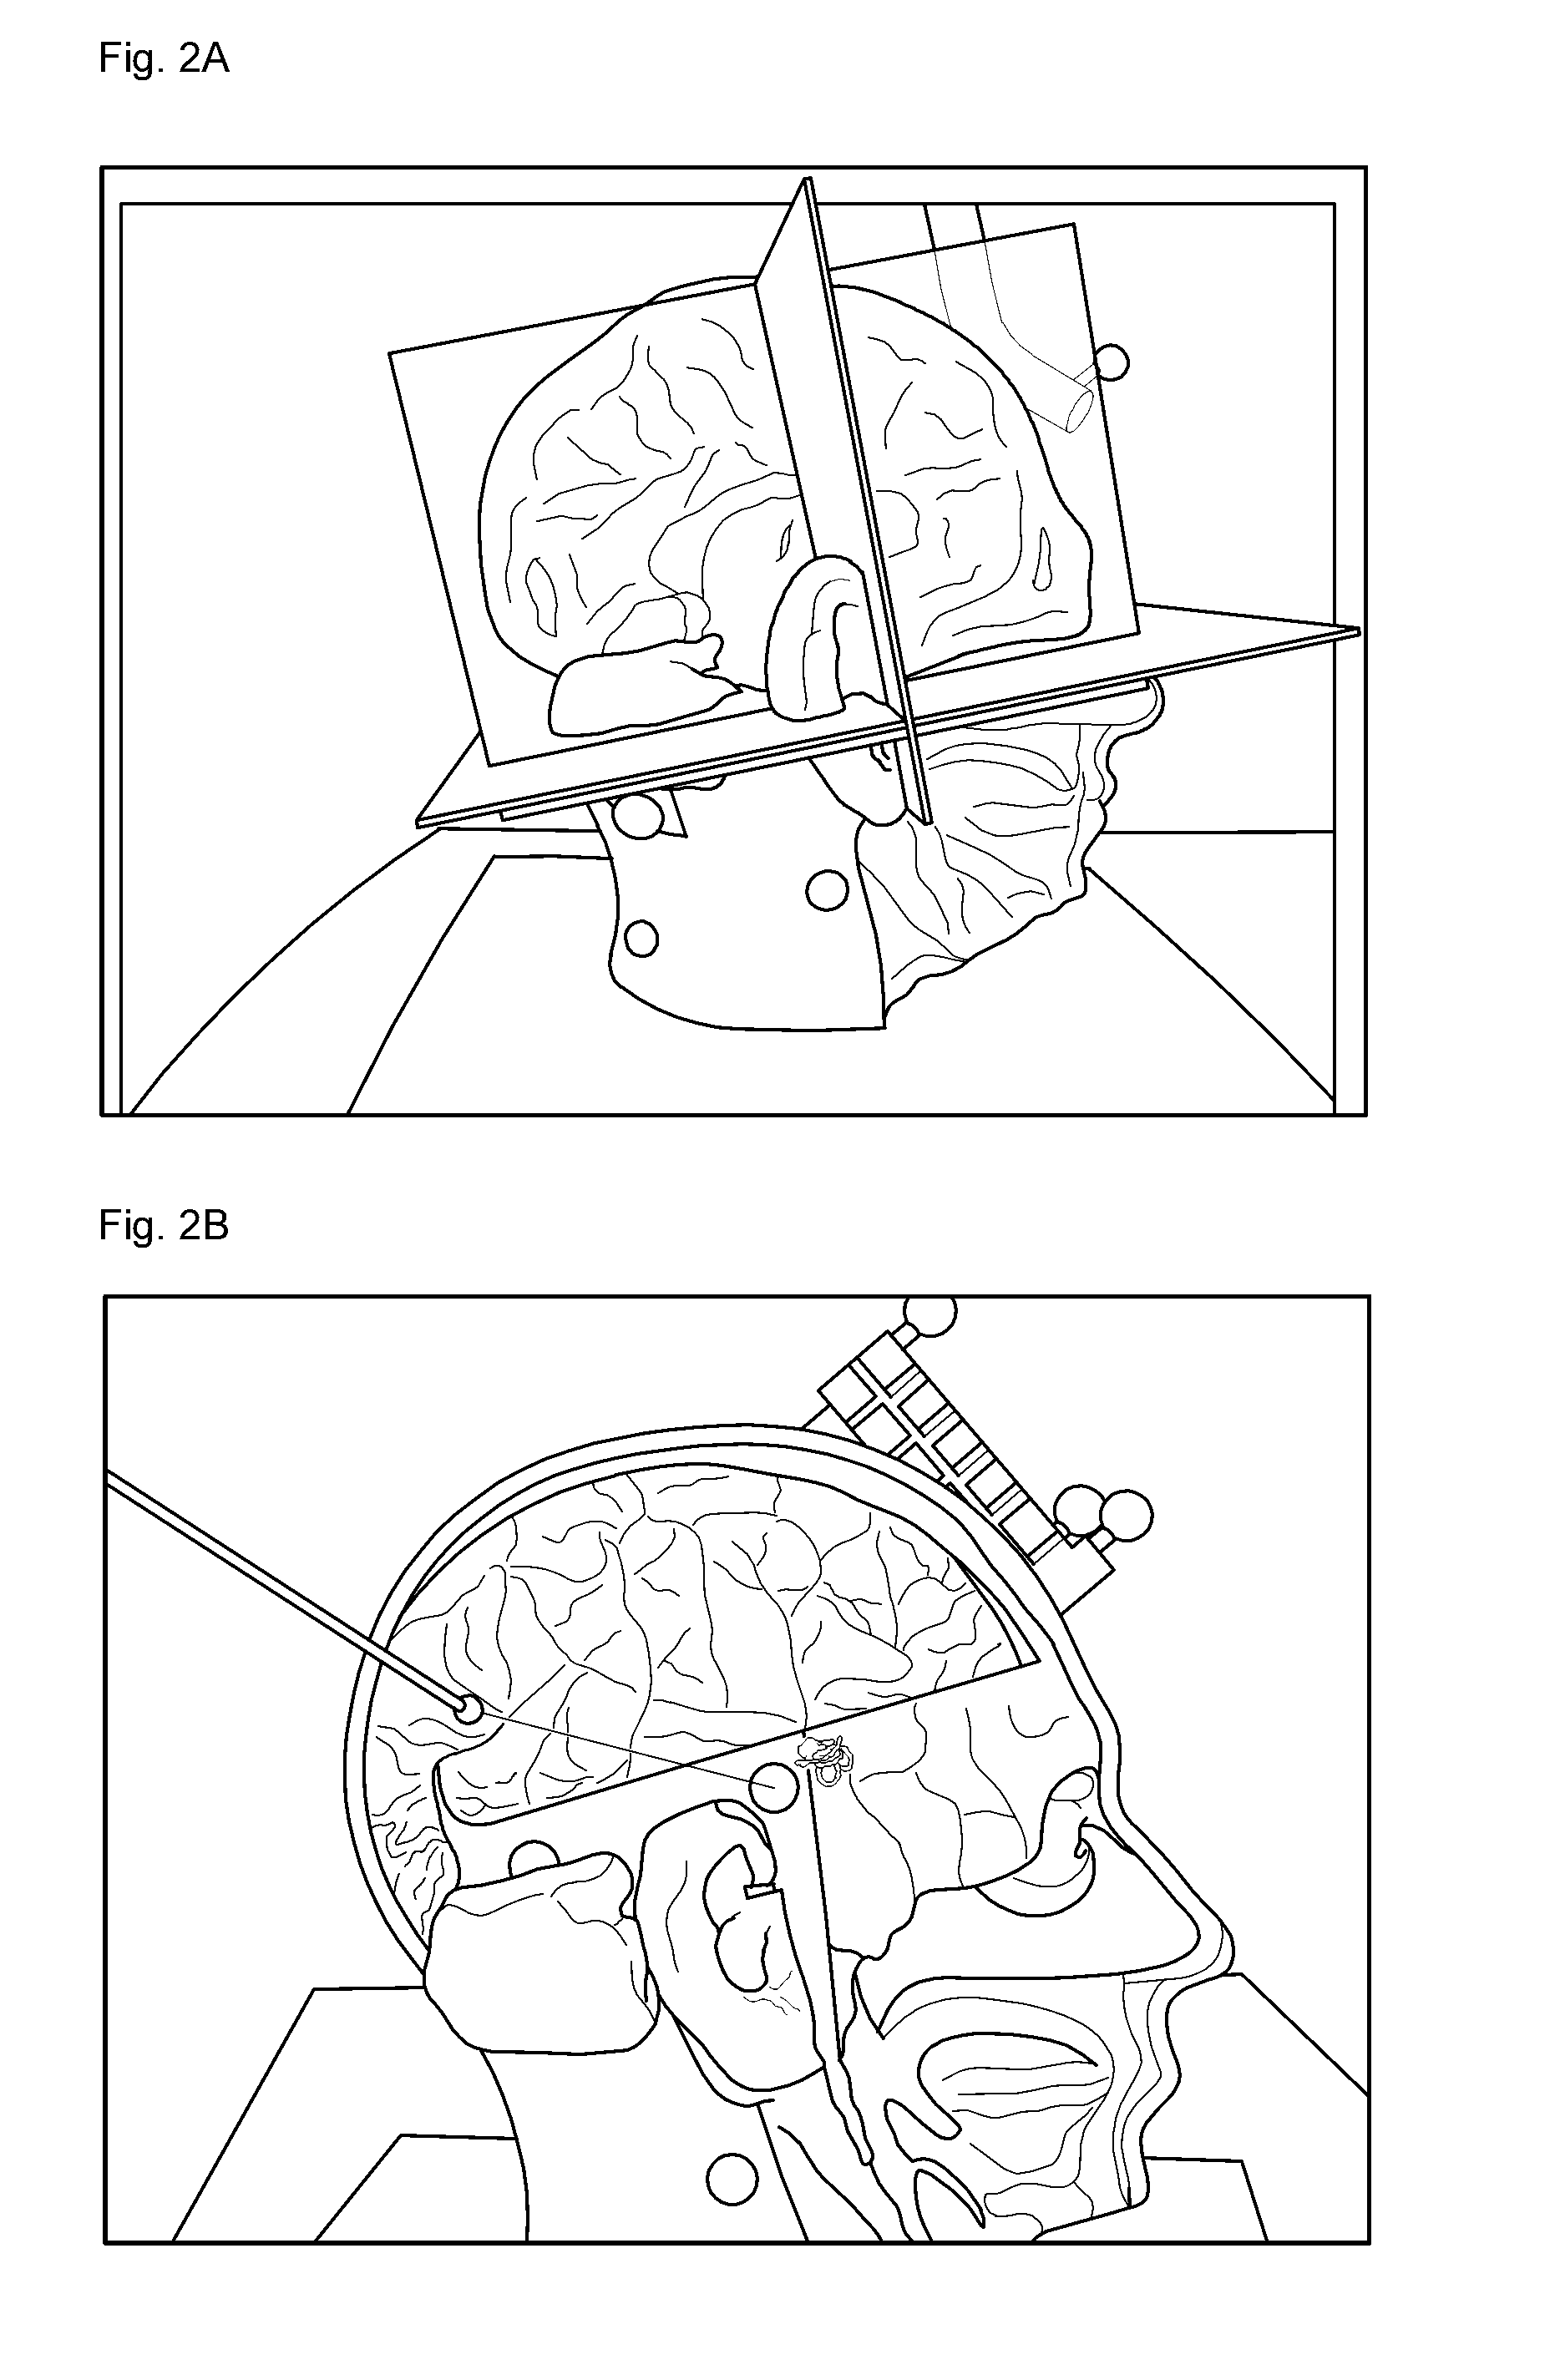 Method of operating a surgical navigation system and a system using the same